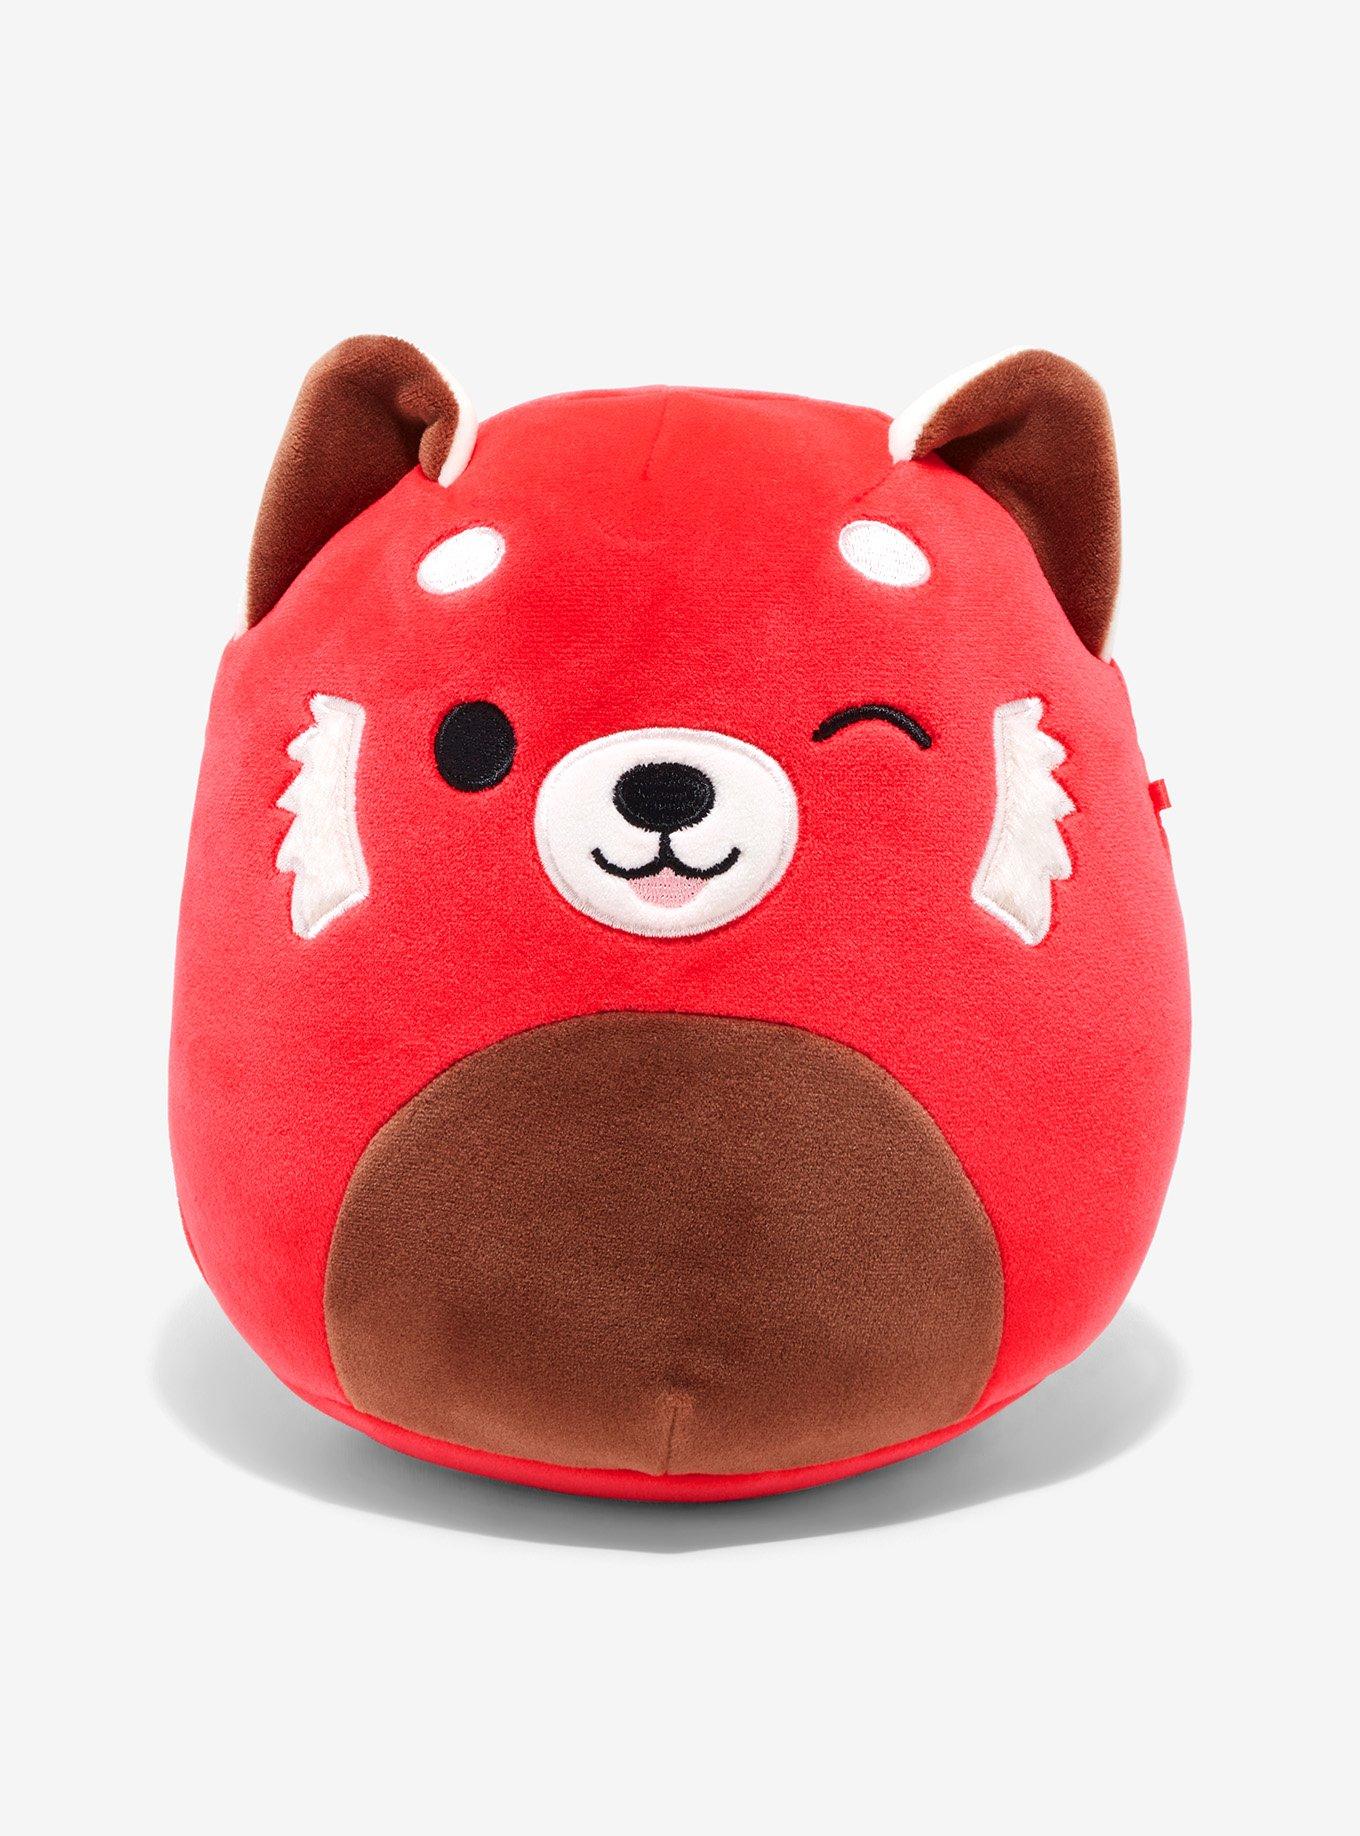 PROMO CODE] How to get the RED PANDA PARTY PET